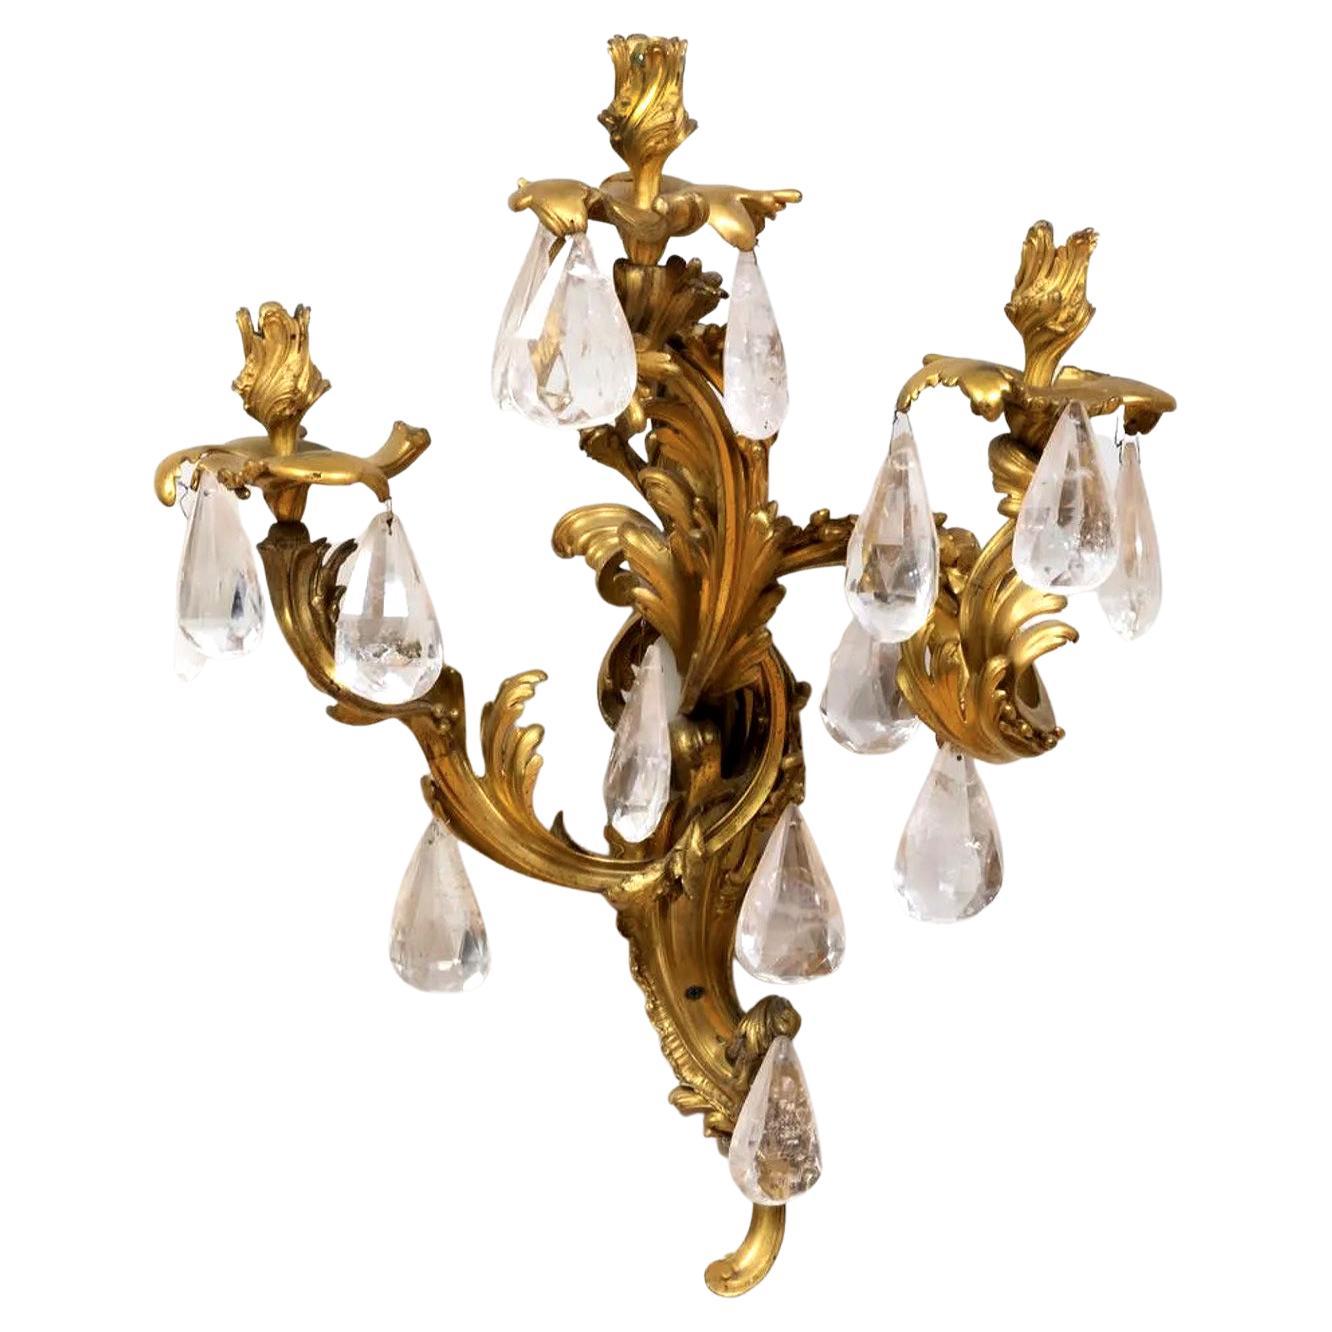 Pair of Louis XV Style Gilt-Bronze-Mounted Rock Sconces